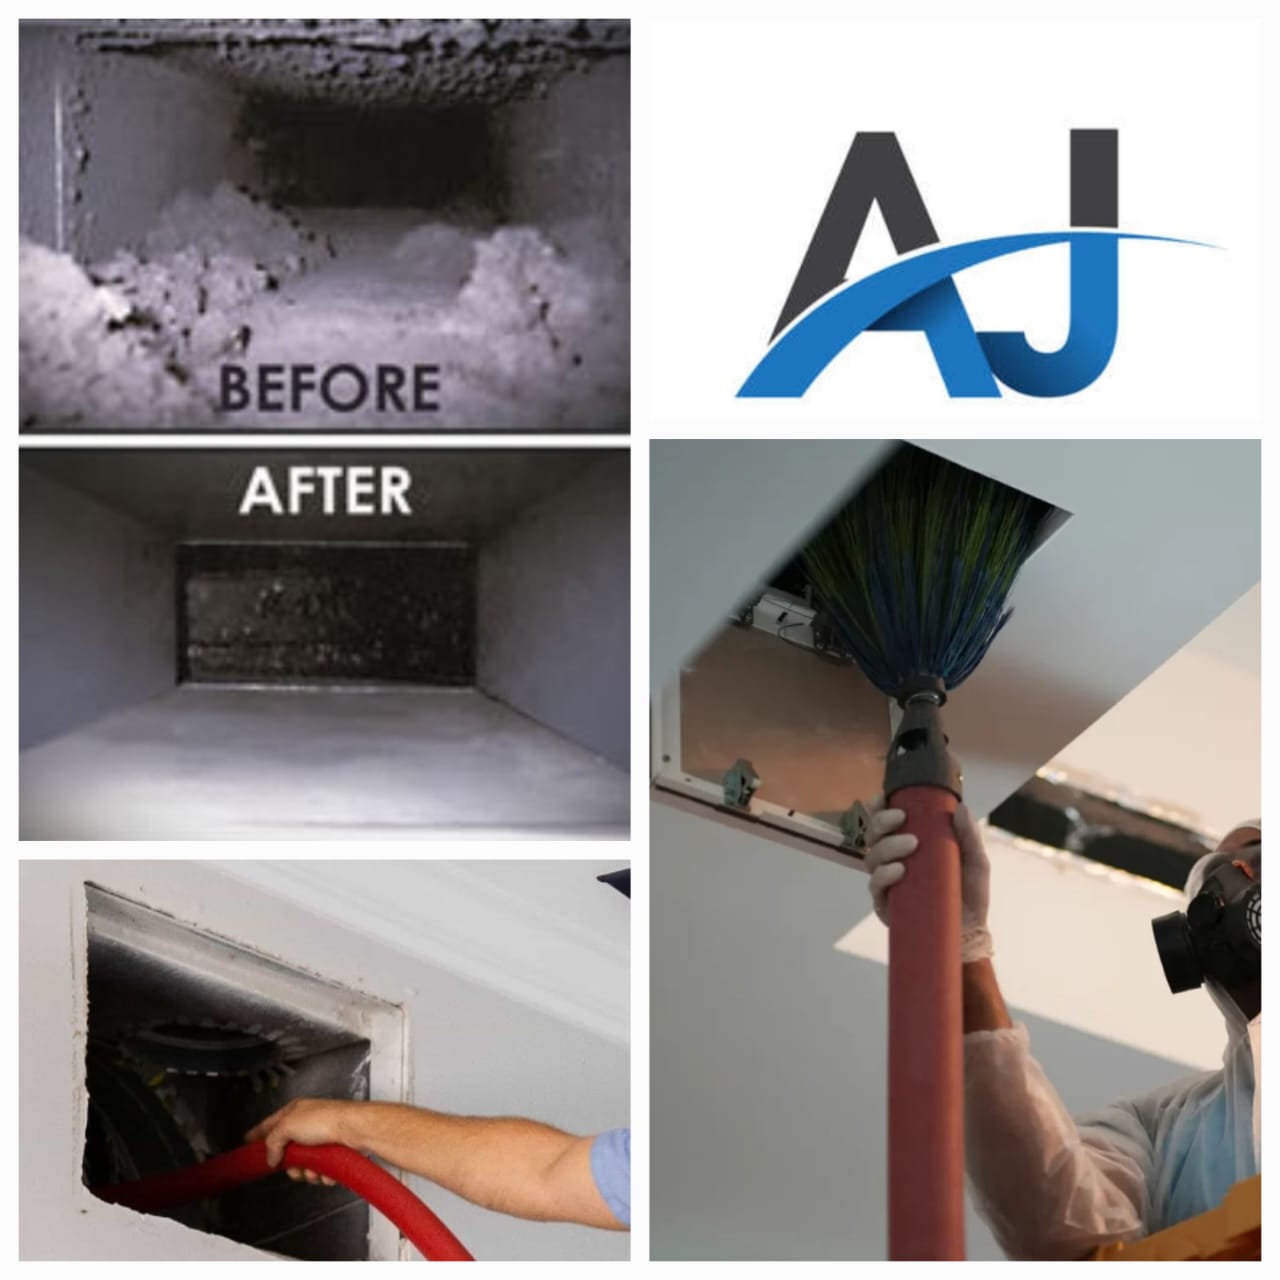 A And J Home Maintenance Services Air Duct Cleaning Services Dubai